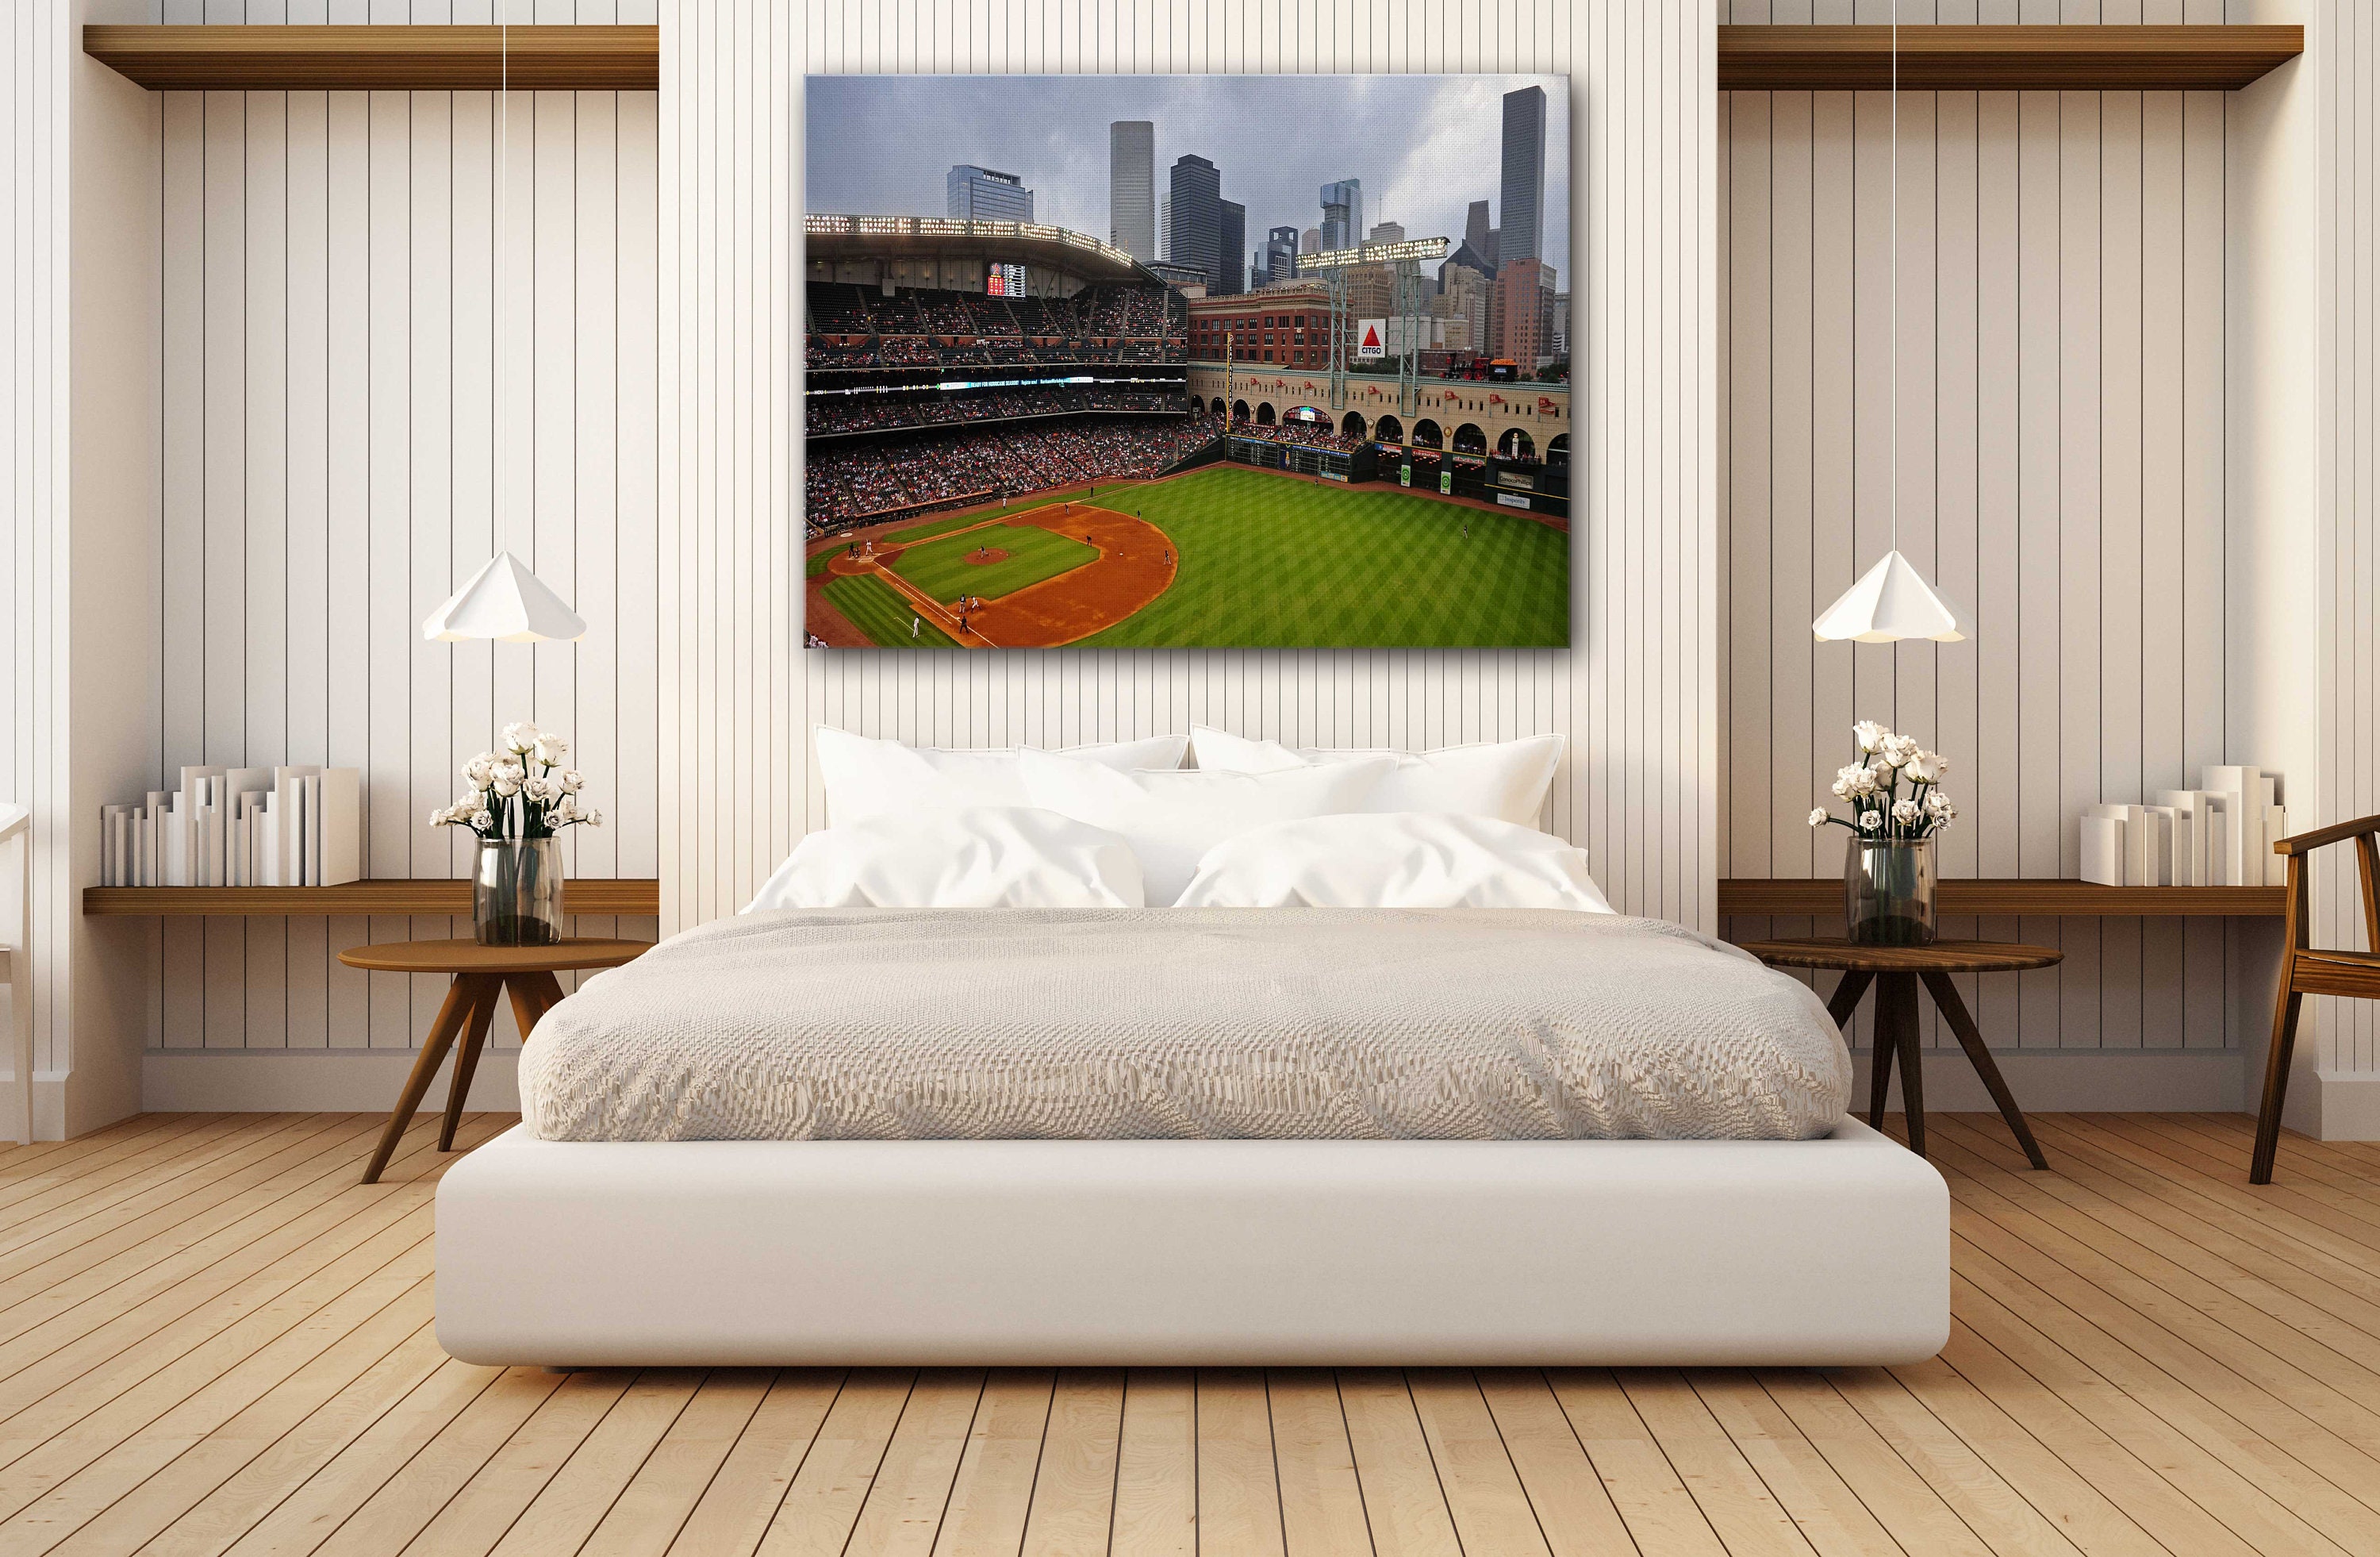  Minute Maid Park Stadium At Night Art Canvas Stadium Wall Art  Decor Living Room Kitchen Home Decoration Wall Canvas Framed Ready To Hang  (Canvas, 8x12): Posters & Prints